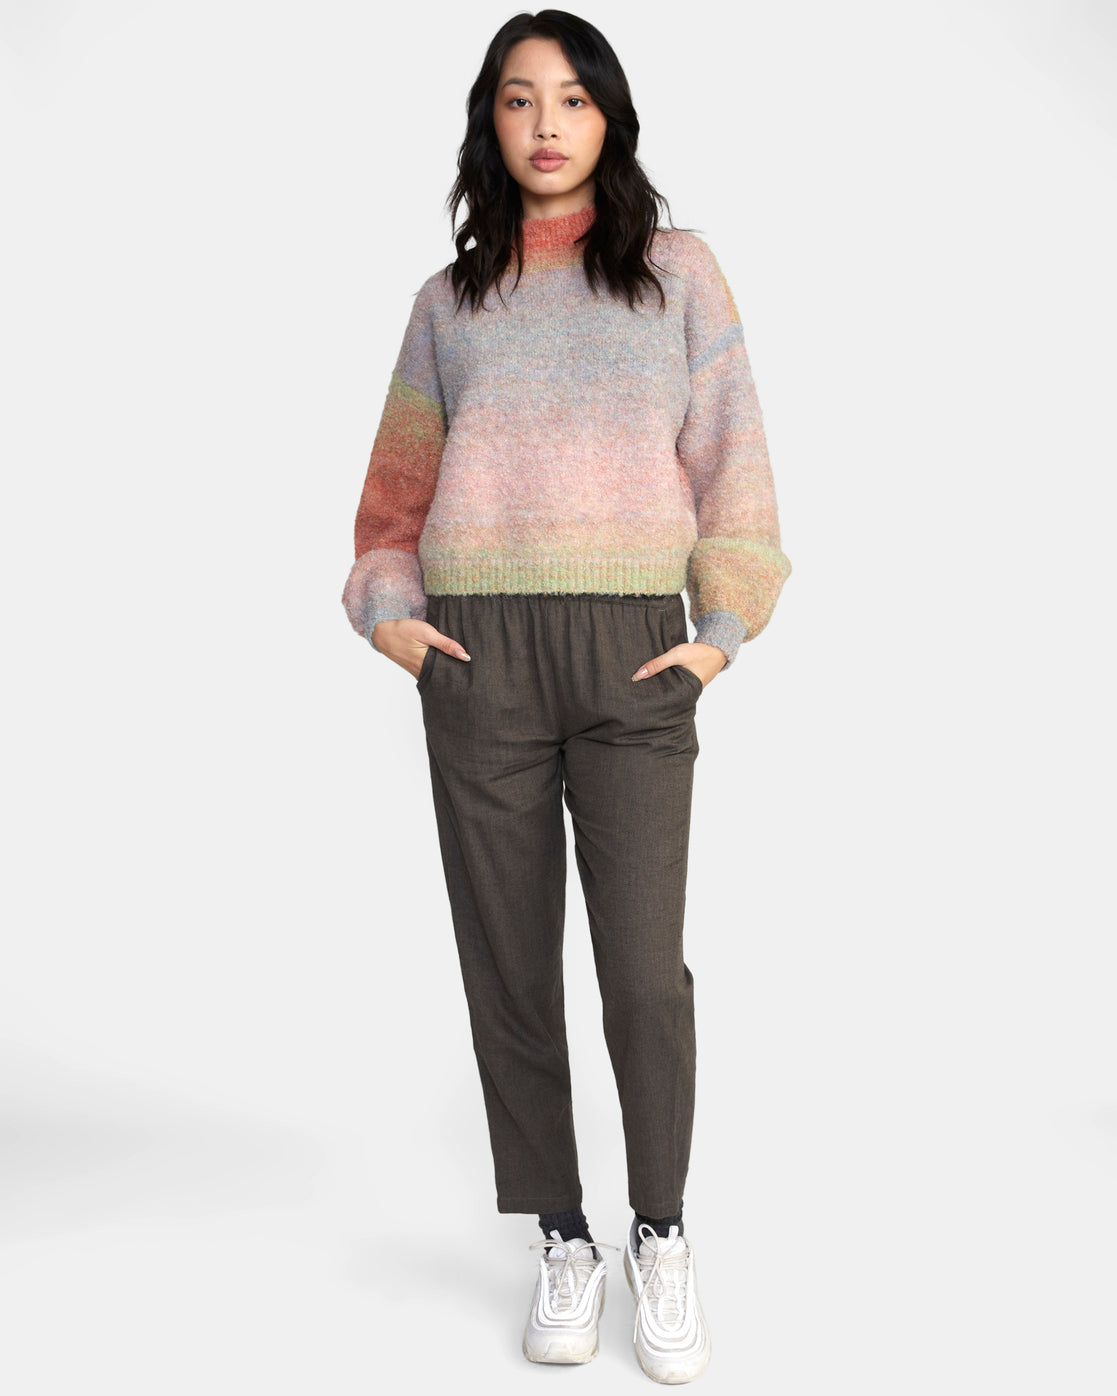 Sweater Mujer Attraction - RVCA